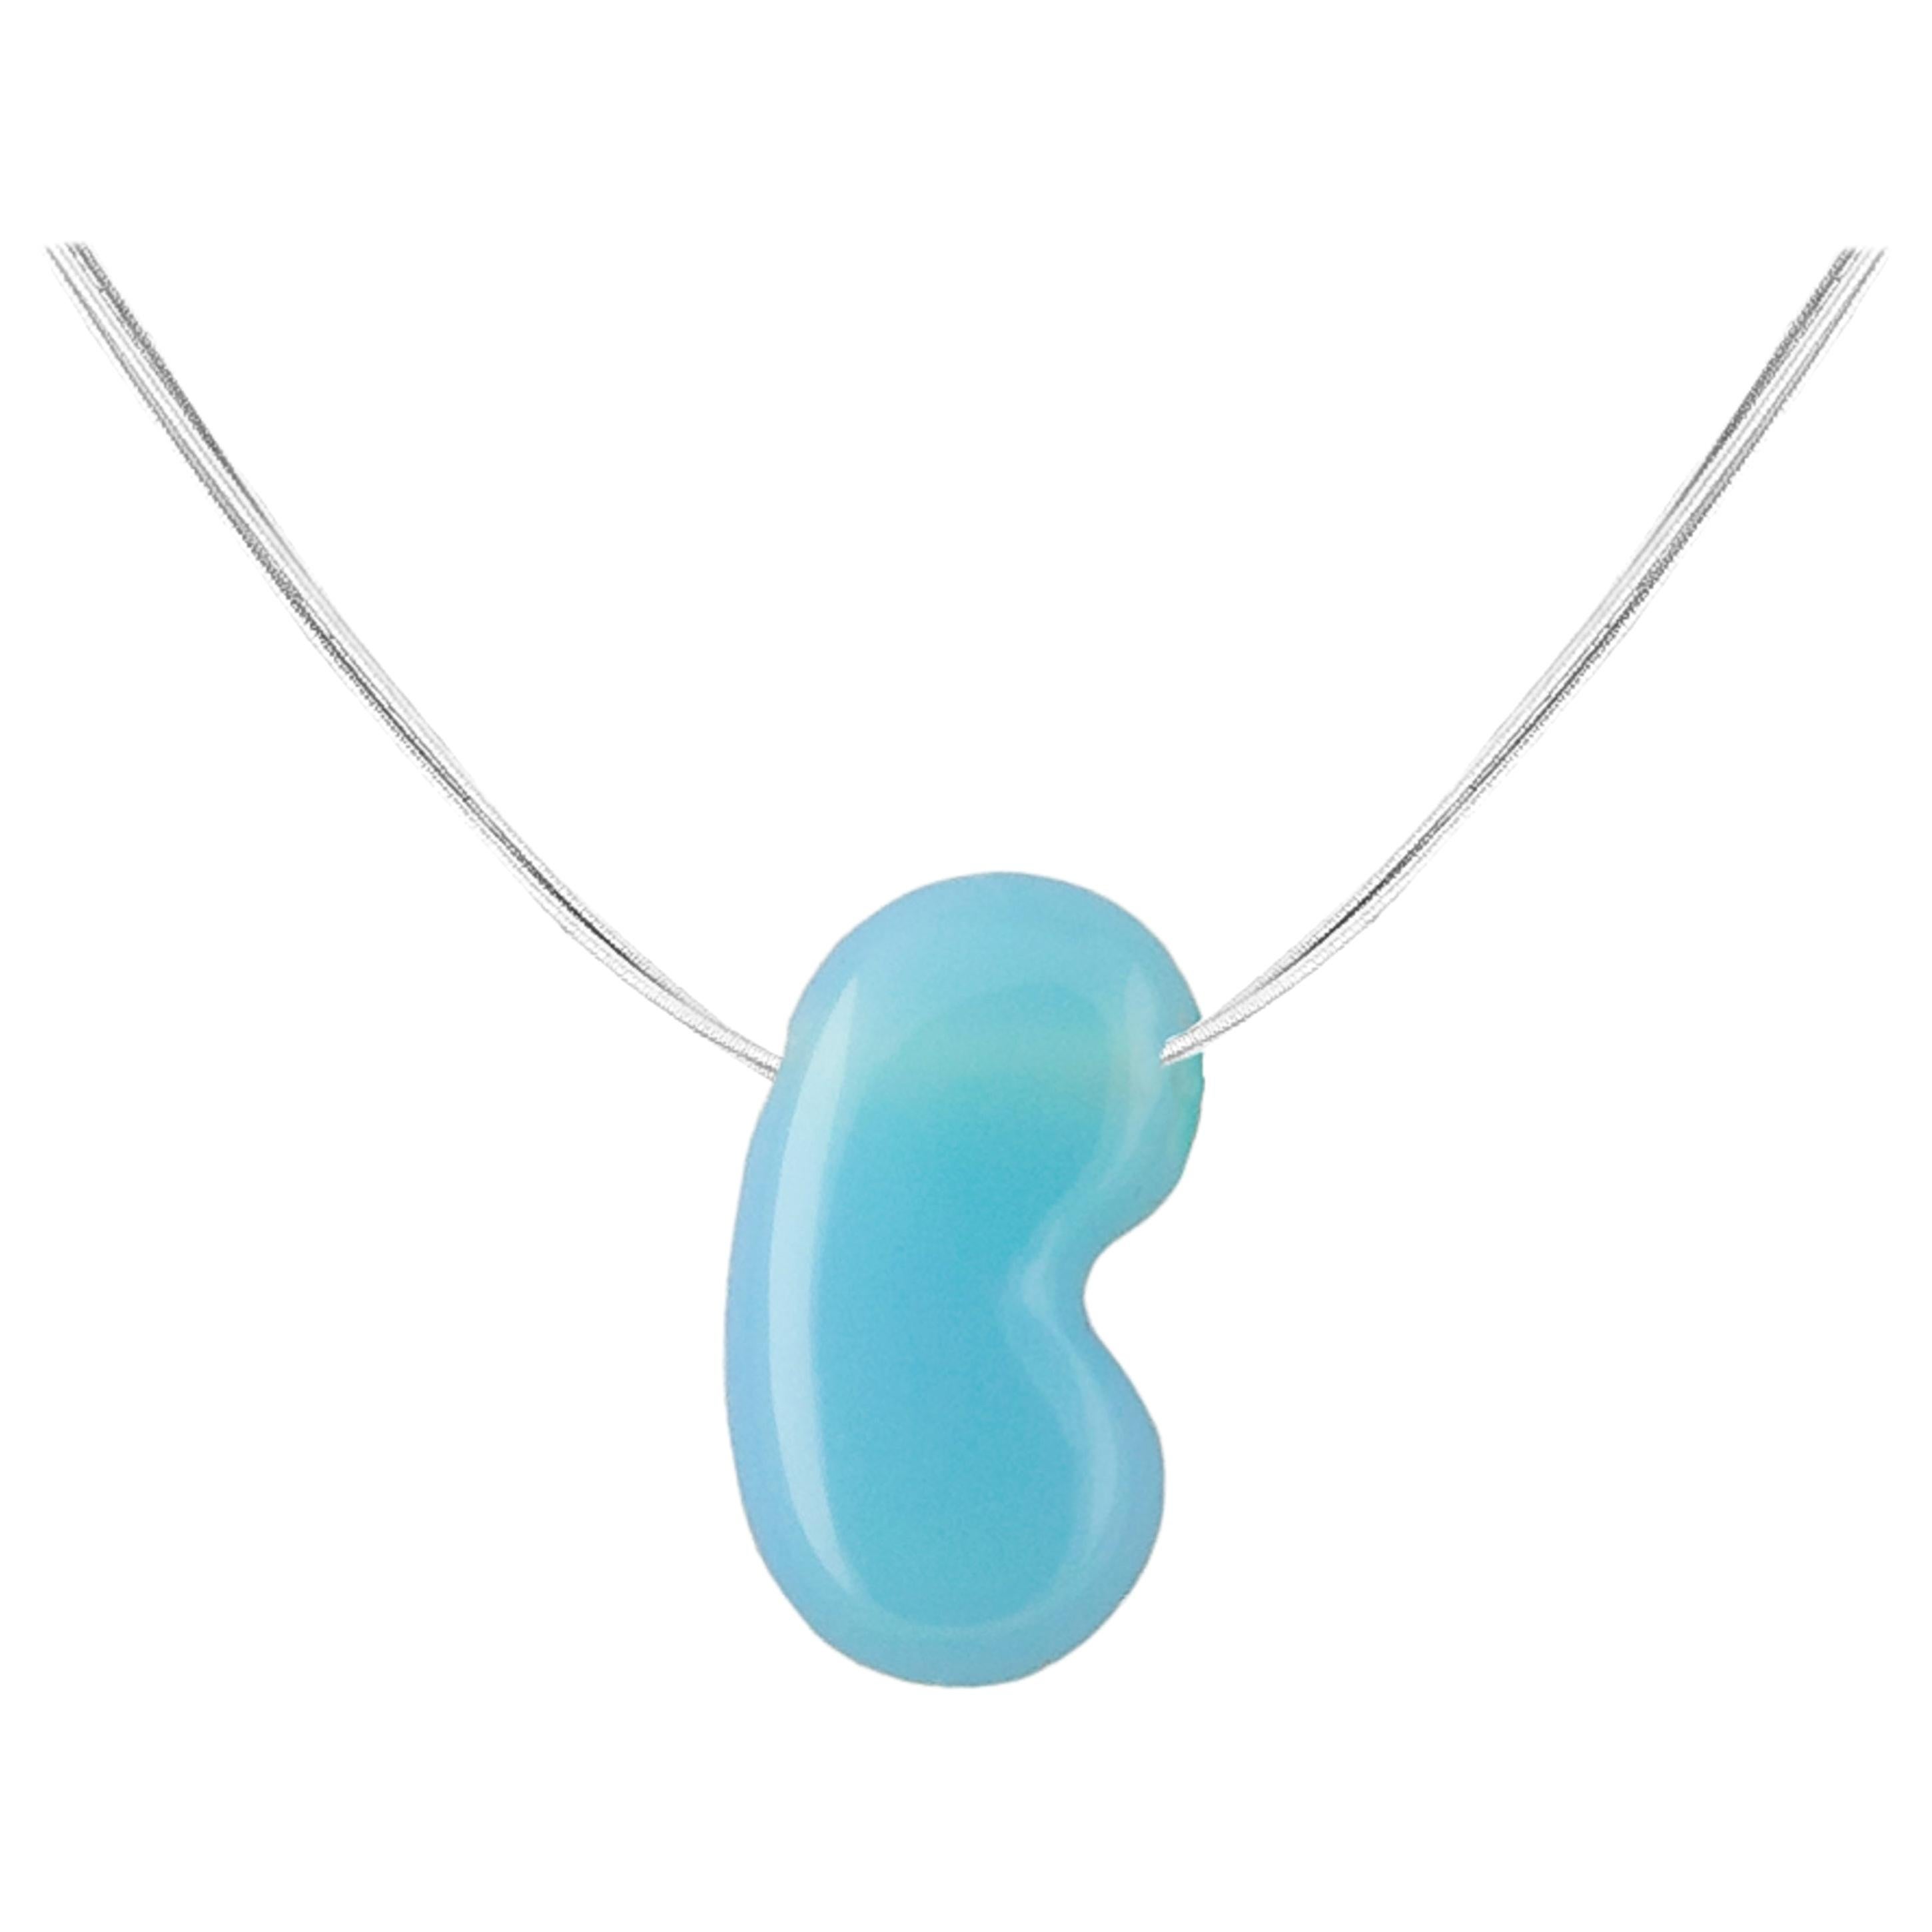 Pendant Necklace, 18 Karat White Gold with Turquoise Agate Jellybean Pendant For Sale